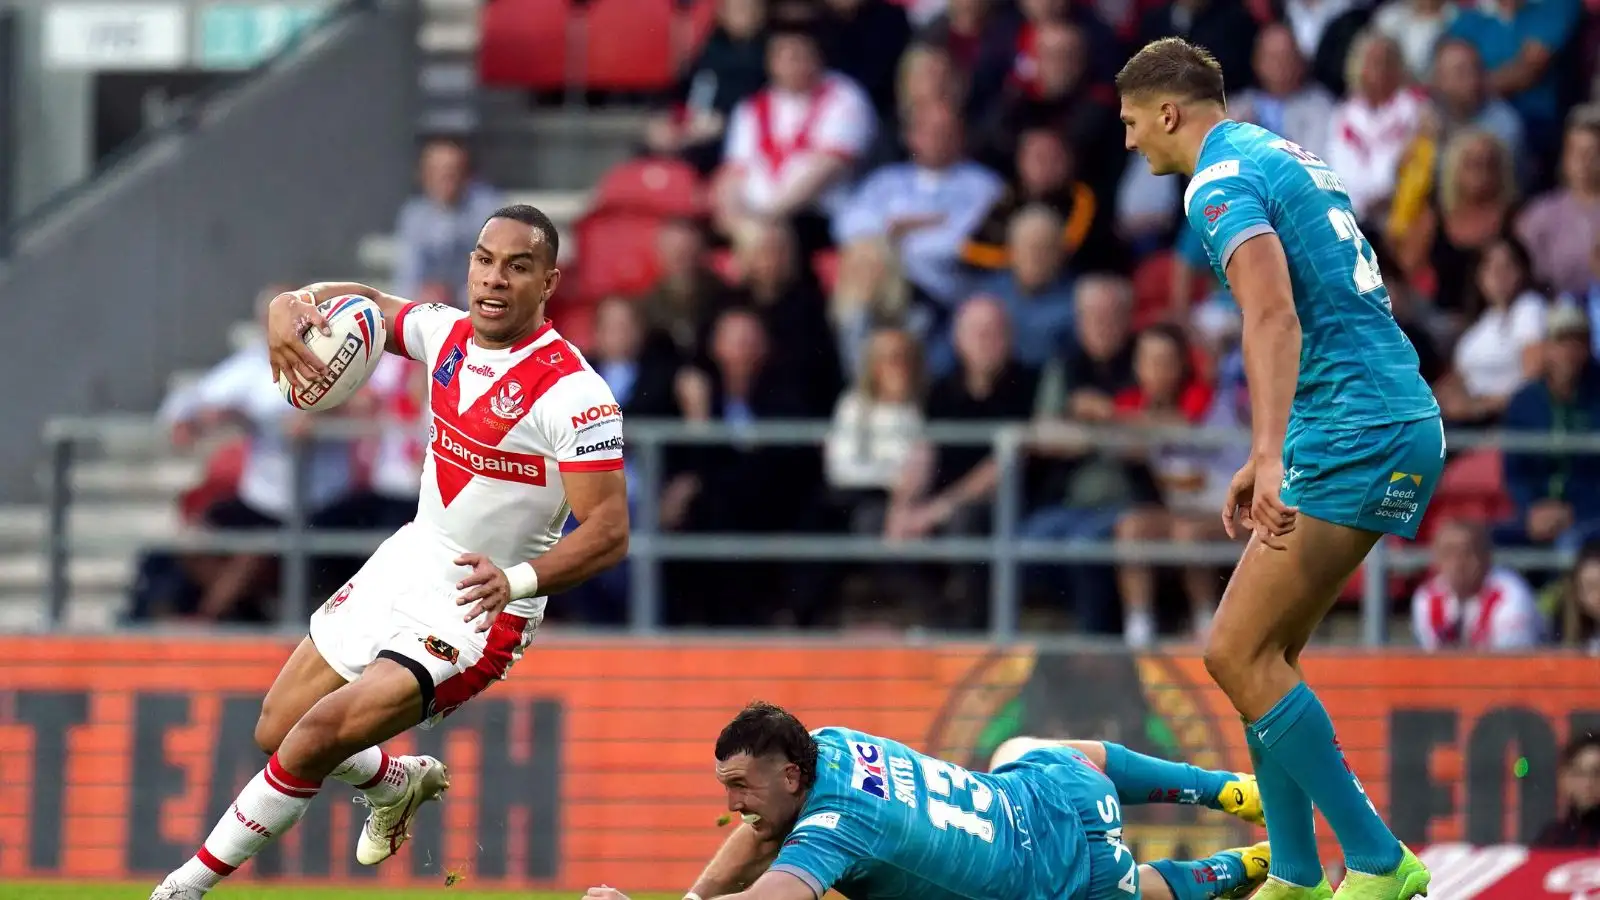 Will Hopoate set for spell on sidelines as Paul Wellens provides latest on Tonga star’s future with option for third year